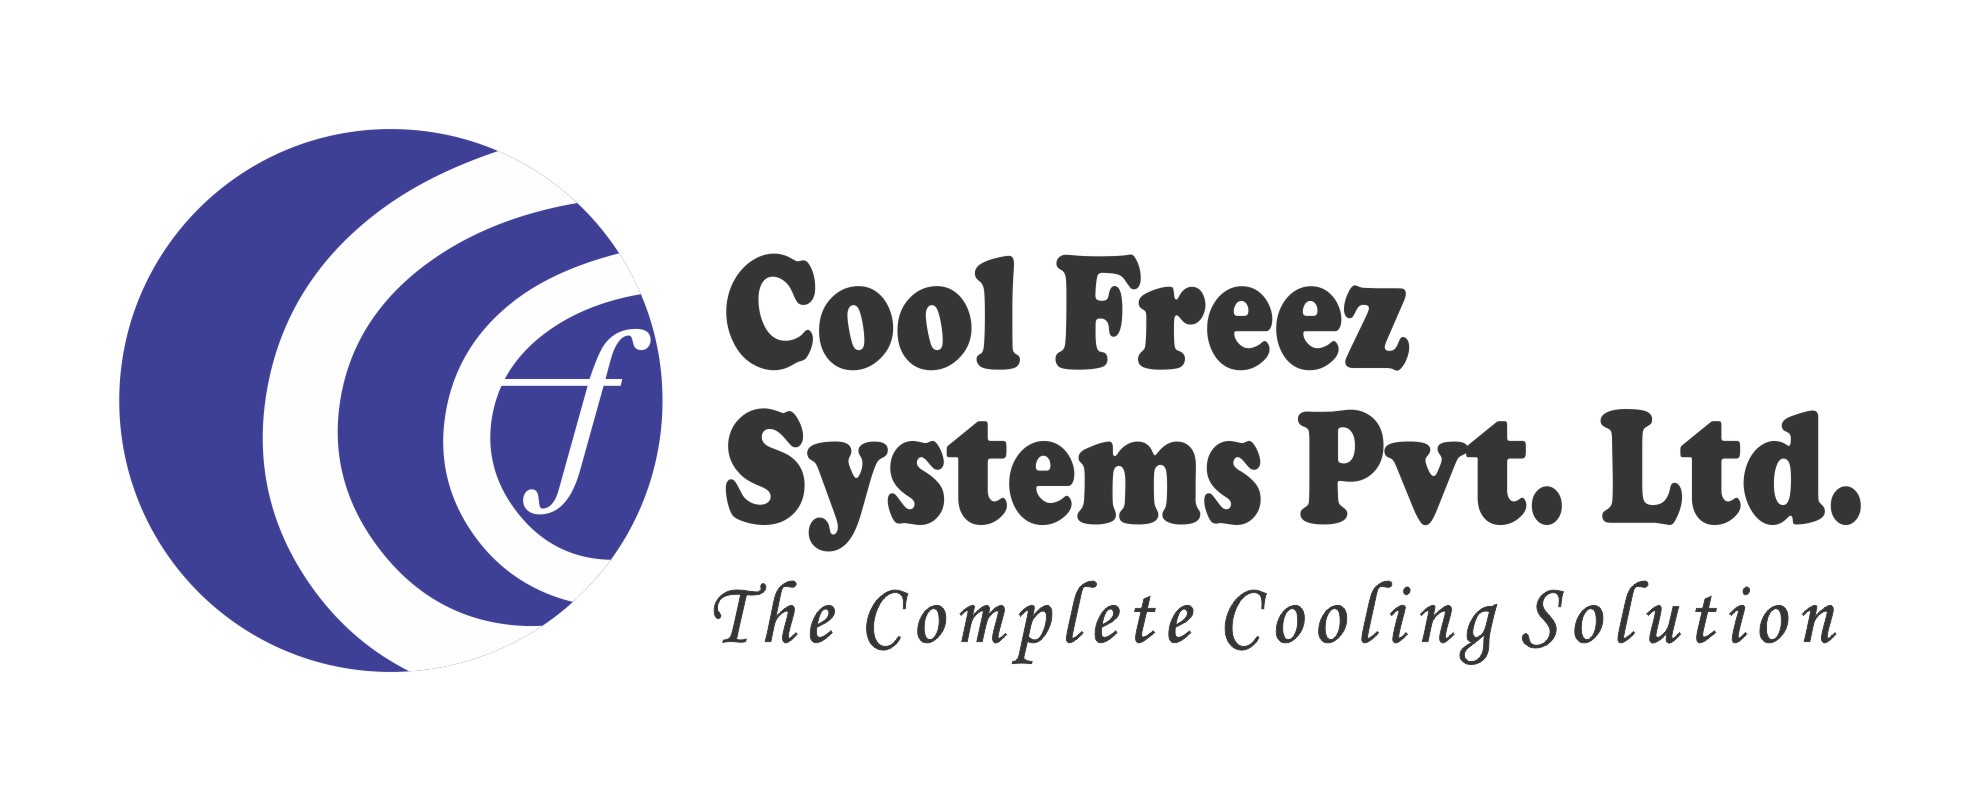 Cool Freez Systems Pvt Ltd - The Complete Cooling Solutions